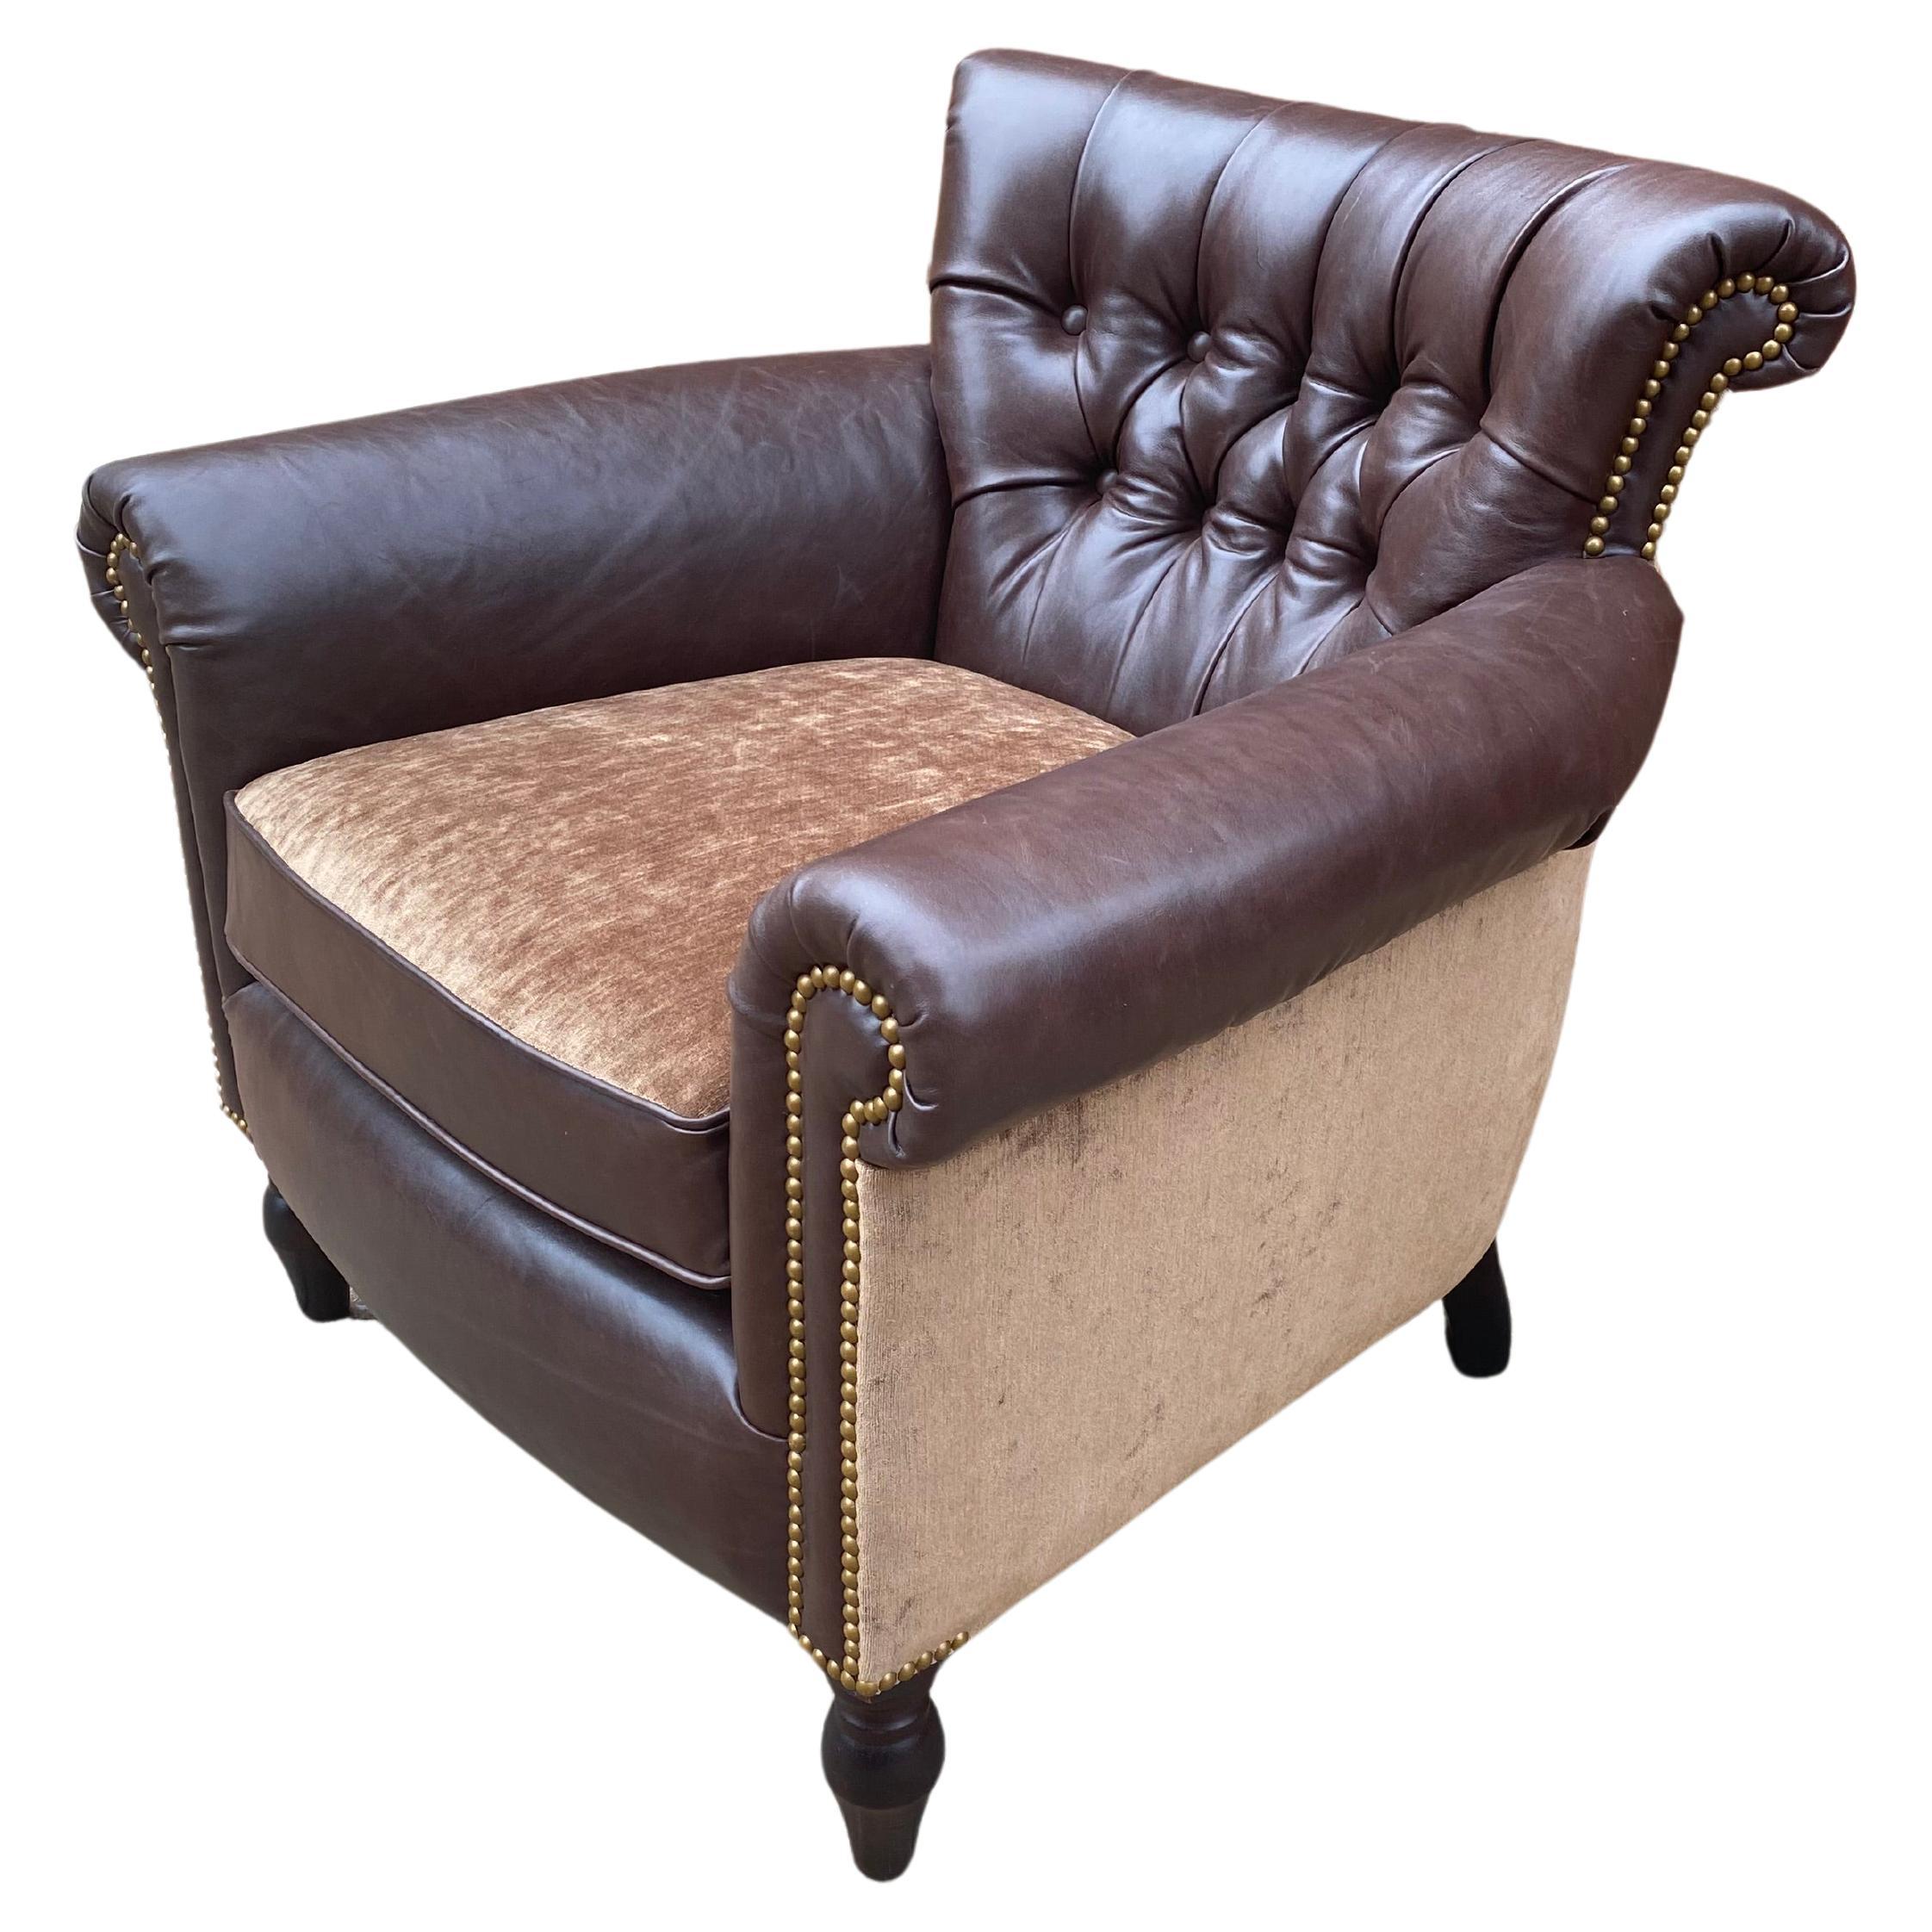 George Smith Plush Tufted Chocolate Leather & Mohair Club Chair For Sale